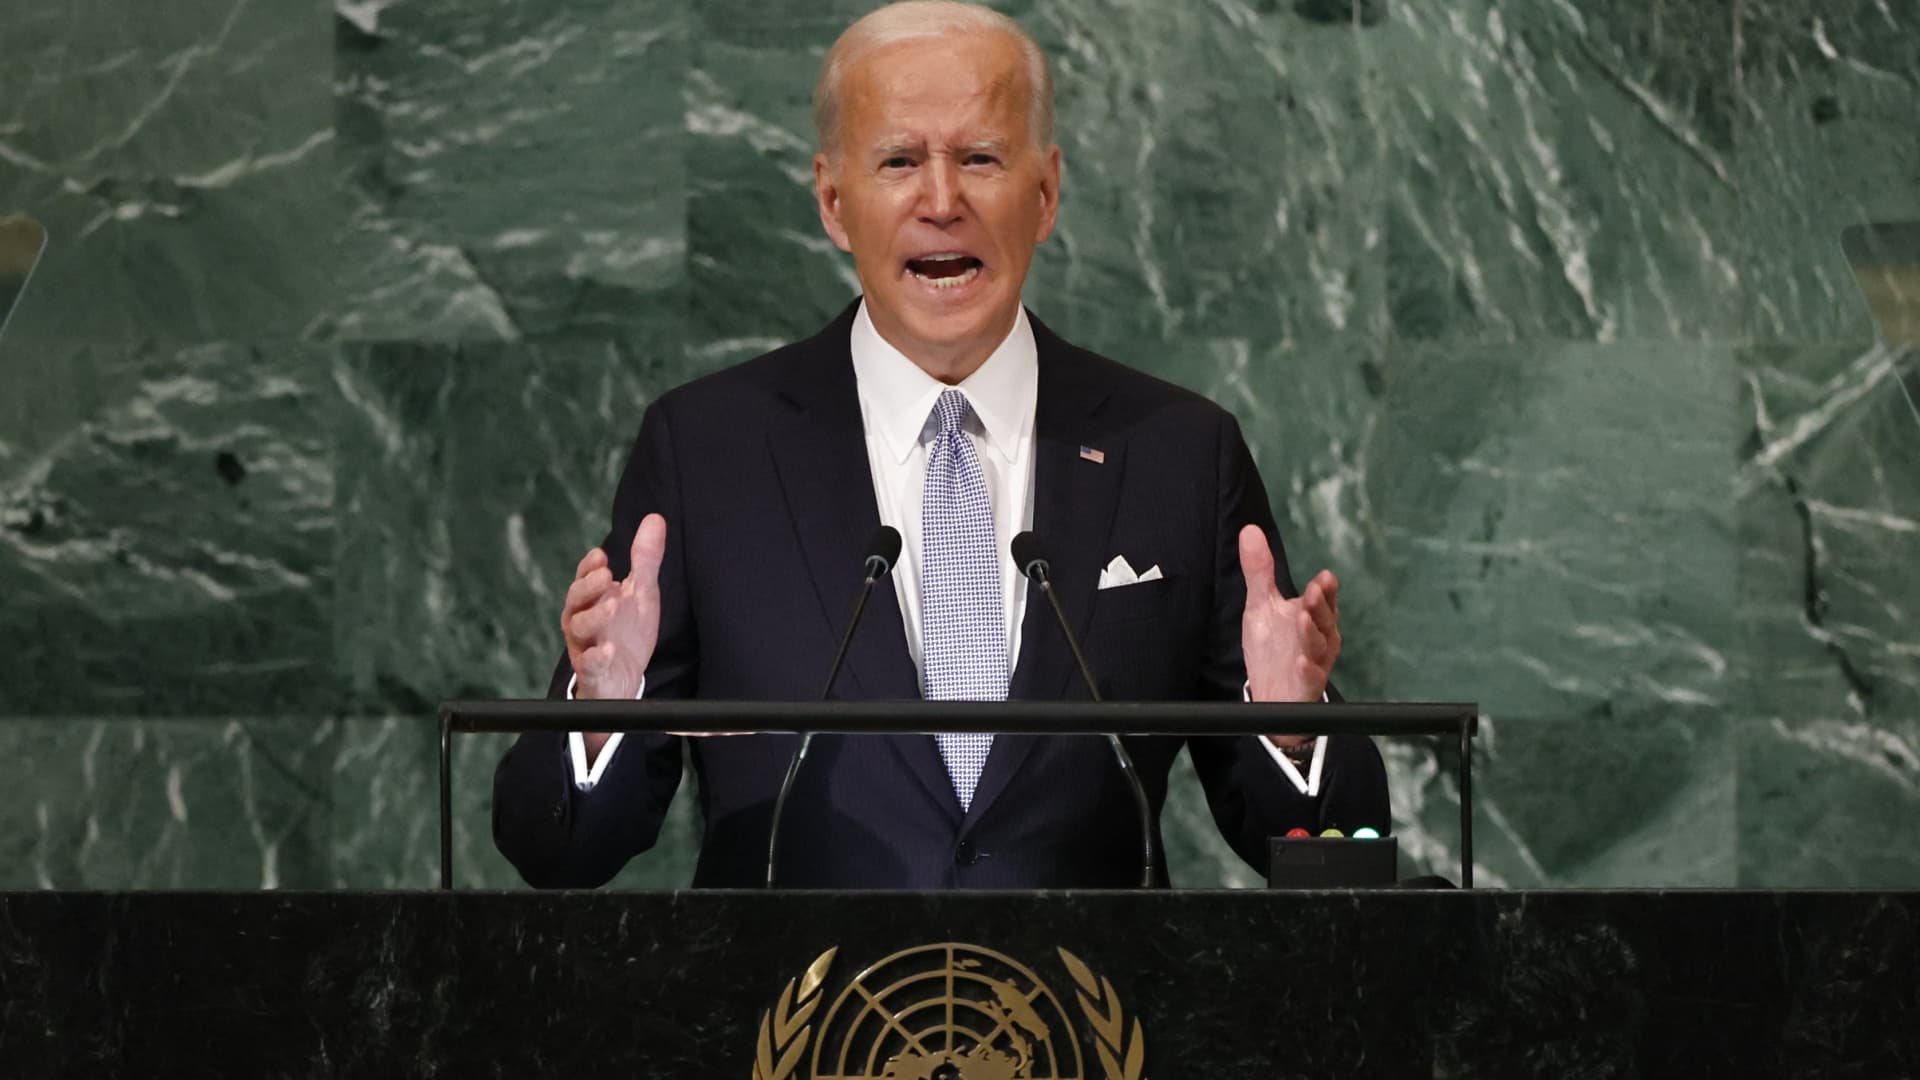 U.S. President Joe Biden addresses the 77th Session of the United Nations General Assembly at U.N. Headquarters in New York City, September 21, 2022.